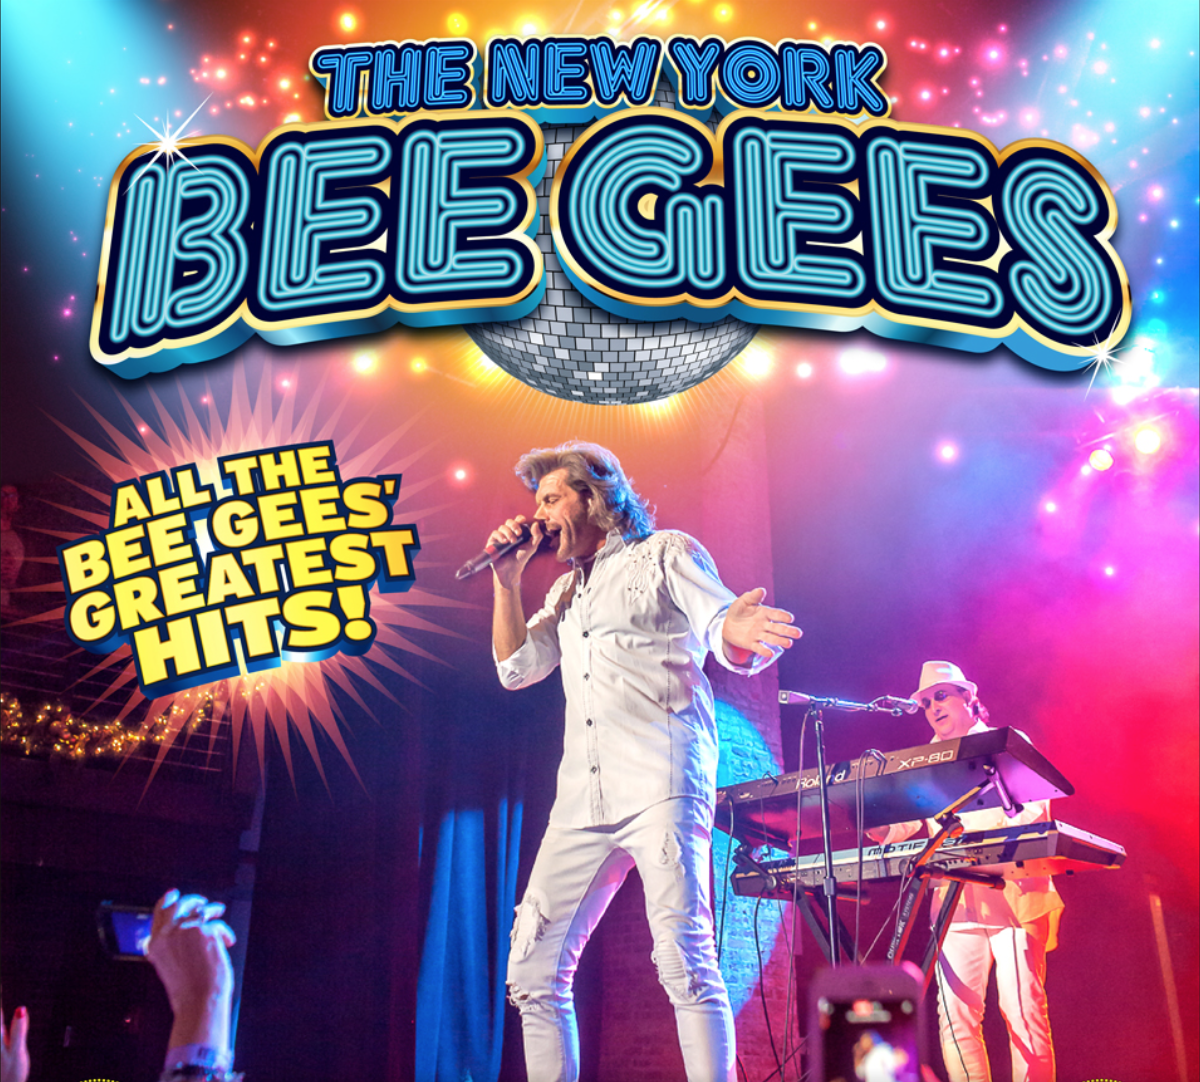 New York Bee Gees at Kirby Center for the Performing Arts